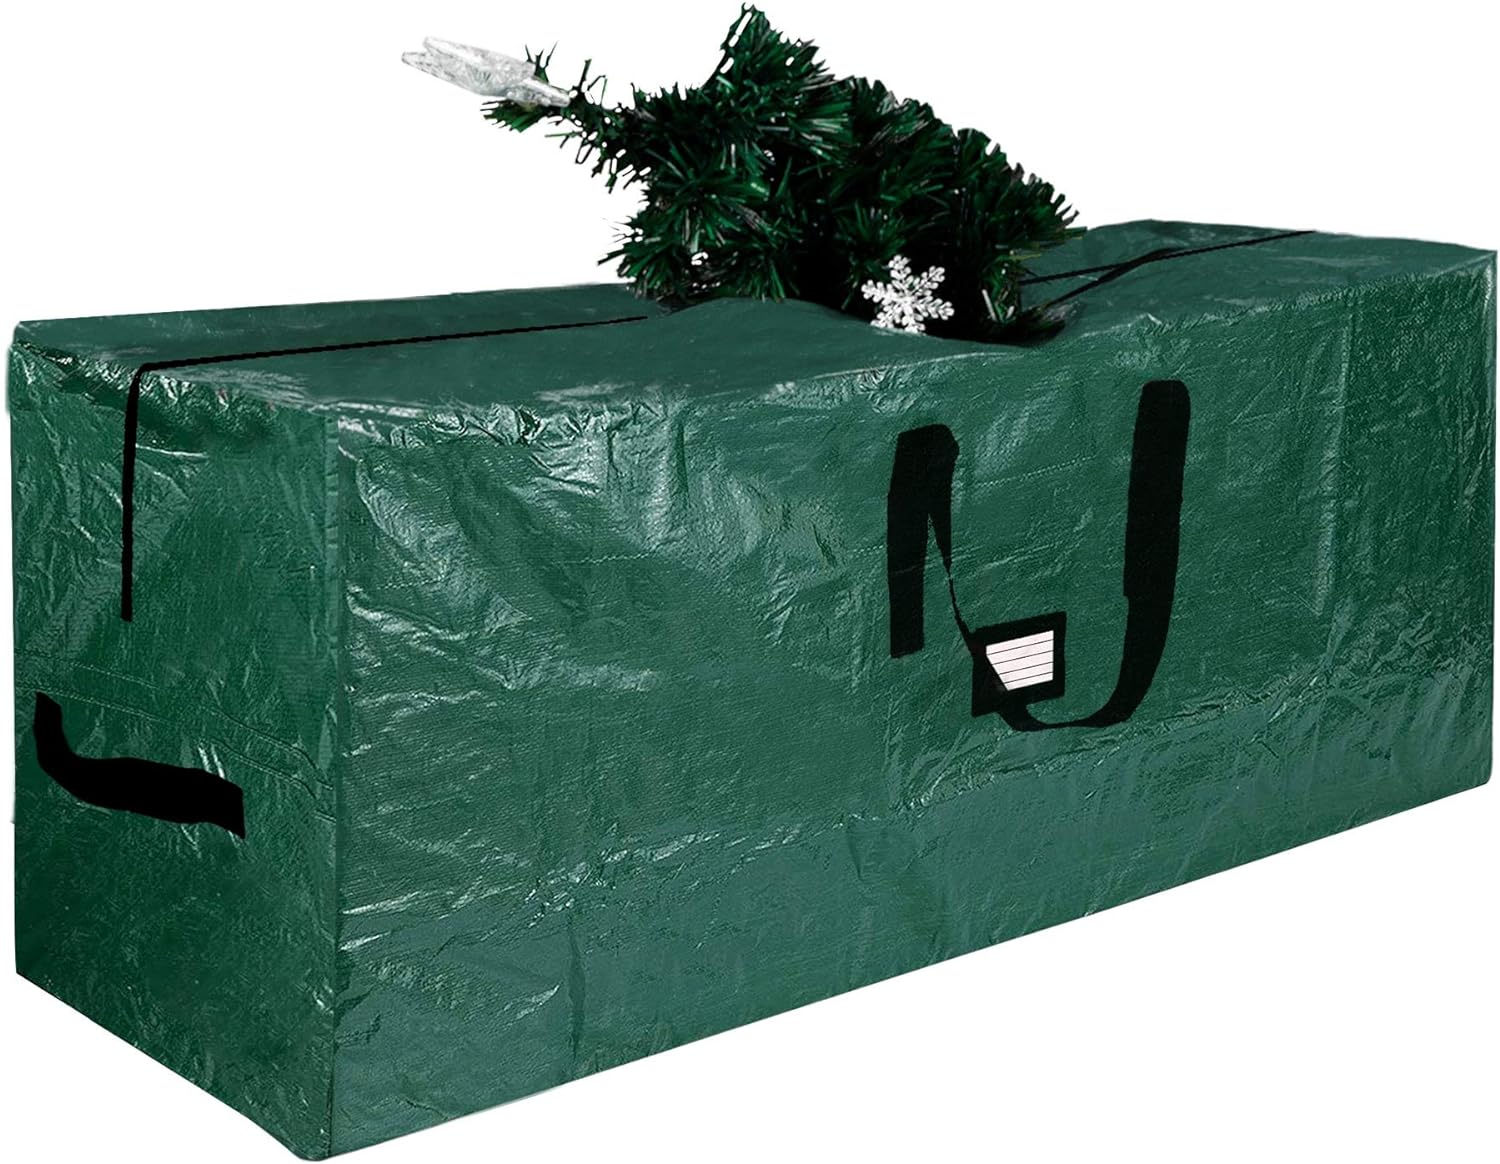 Large Christmas Tree Storage Box Heavy Duty Xmas Storage Container hogardeck Christmas Tree Storage Bag Fits 9 FT Artificial Dissembled Tree